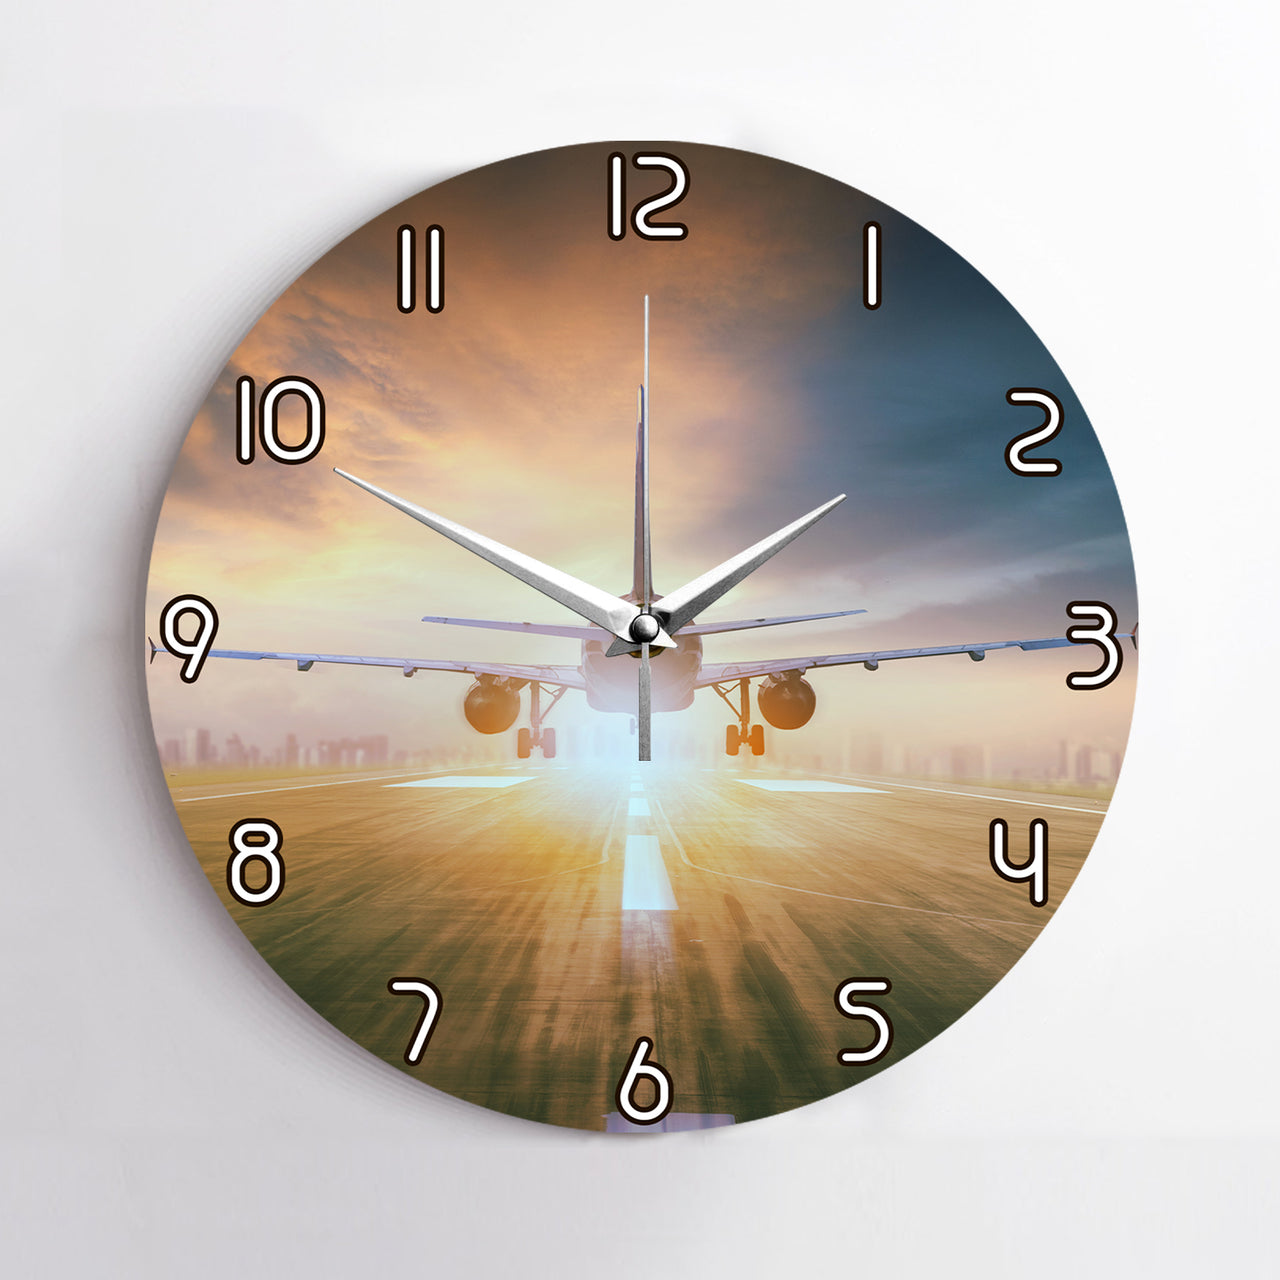 Airplane Flying Over Runway Designed Wall Clocks